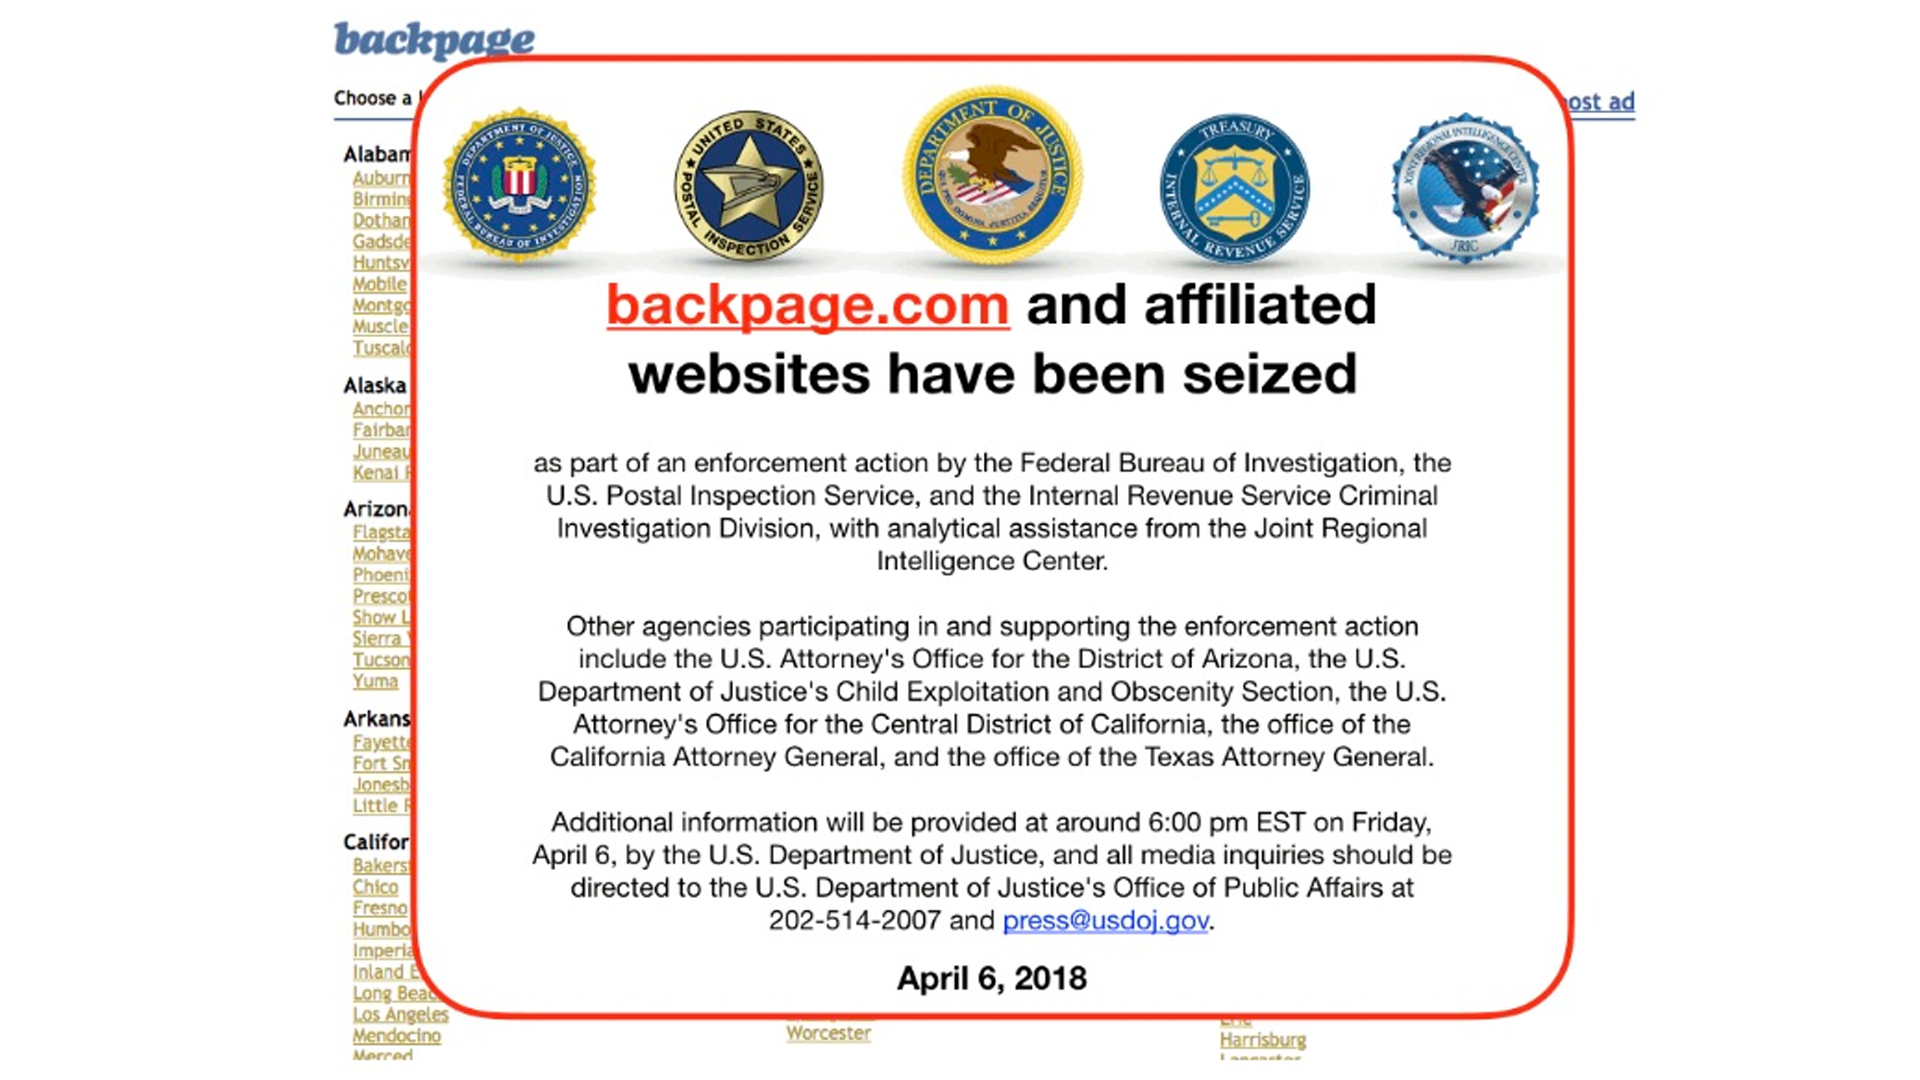 An image on Backpage.com announces it has been seized